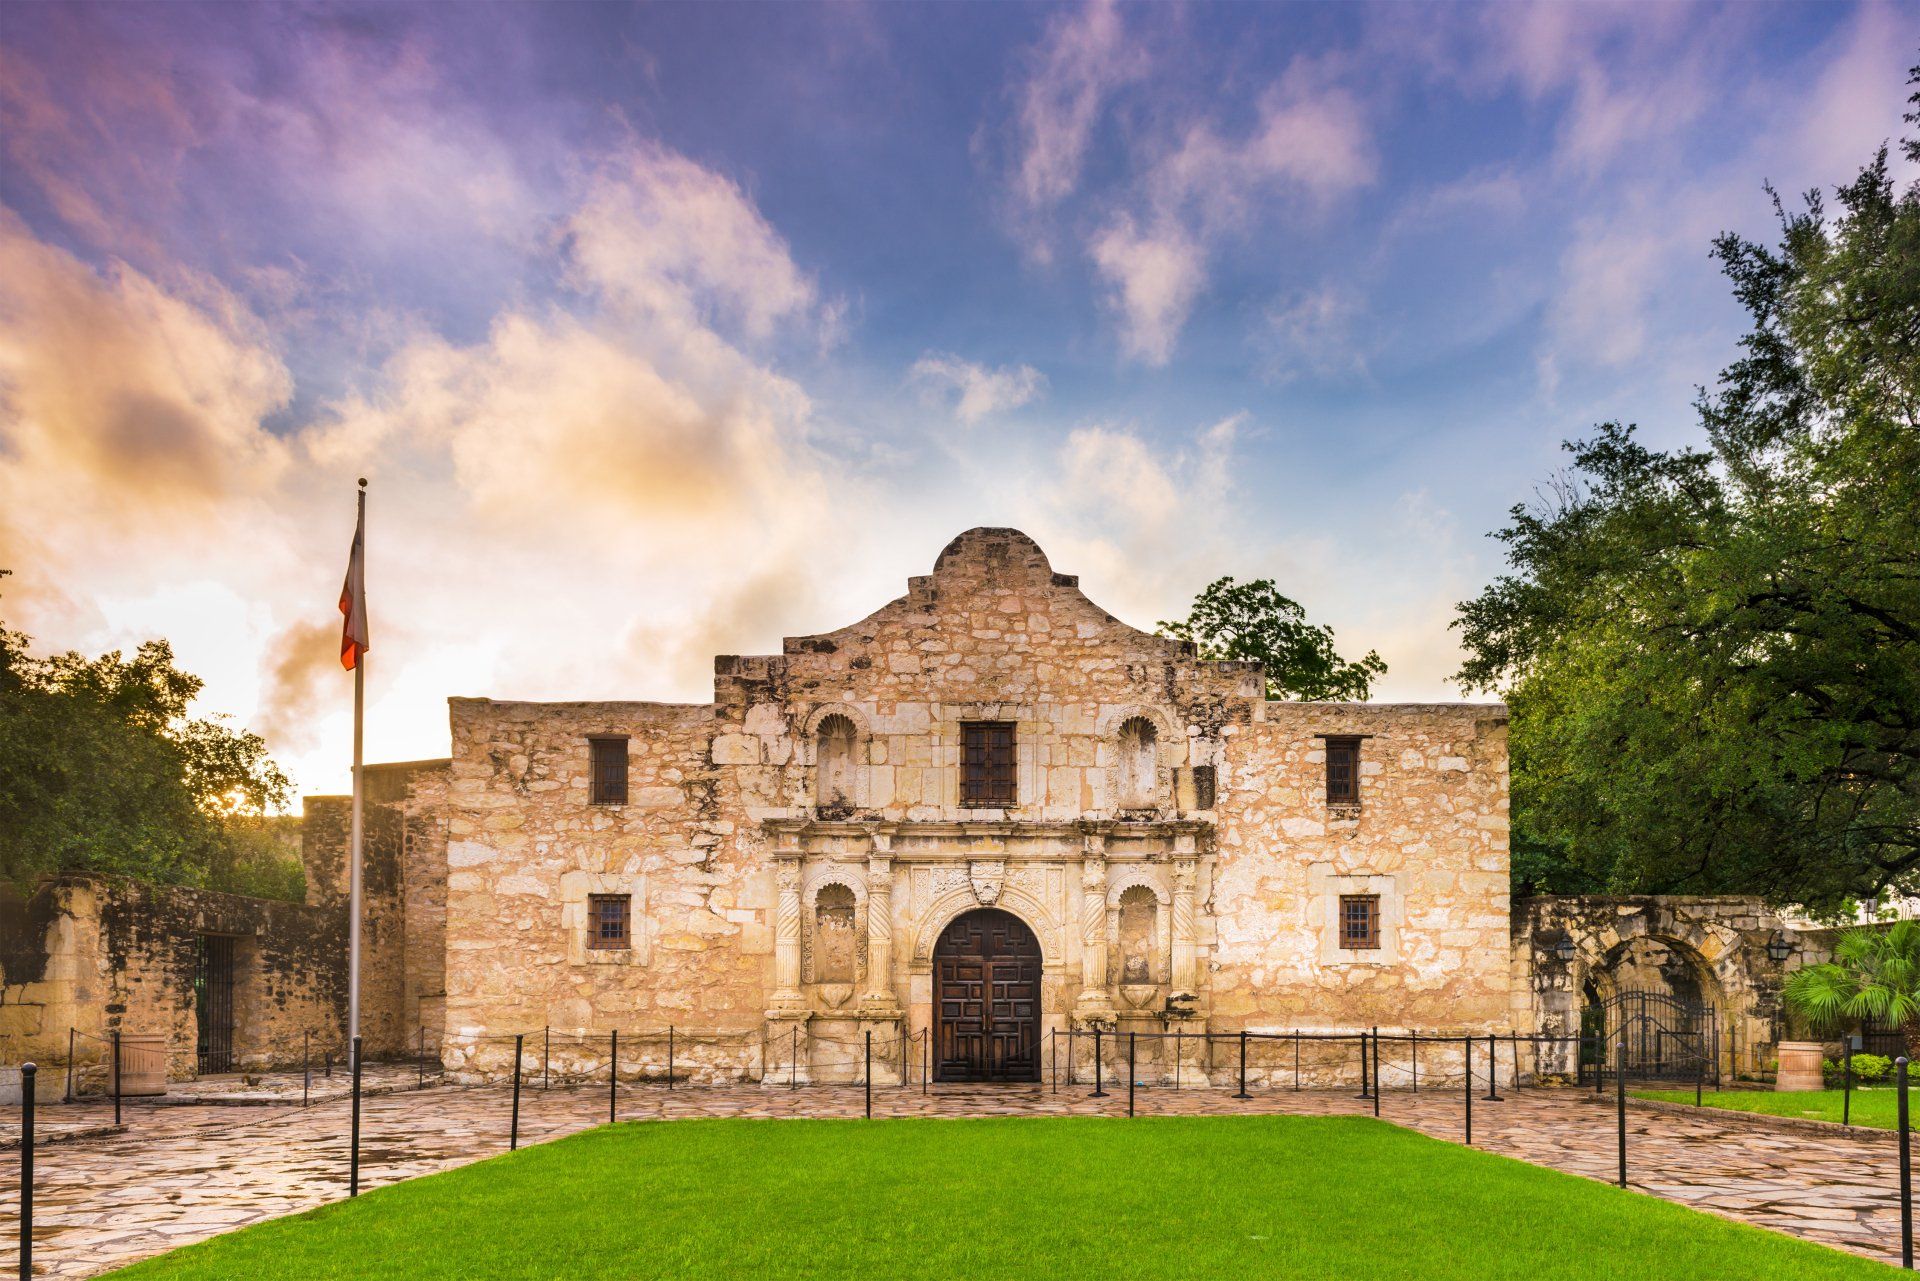 An image of the Alamo in San Antonio, Texas during the day.